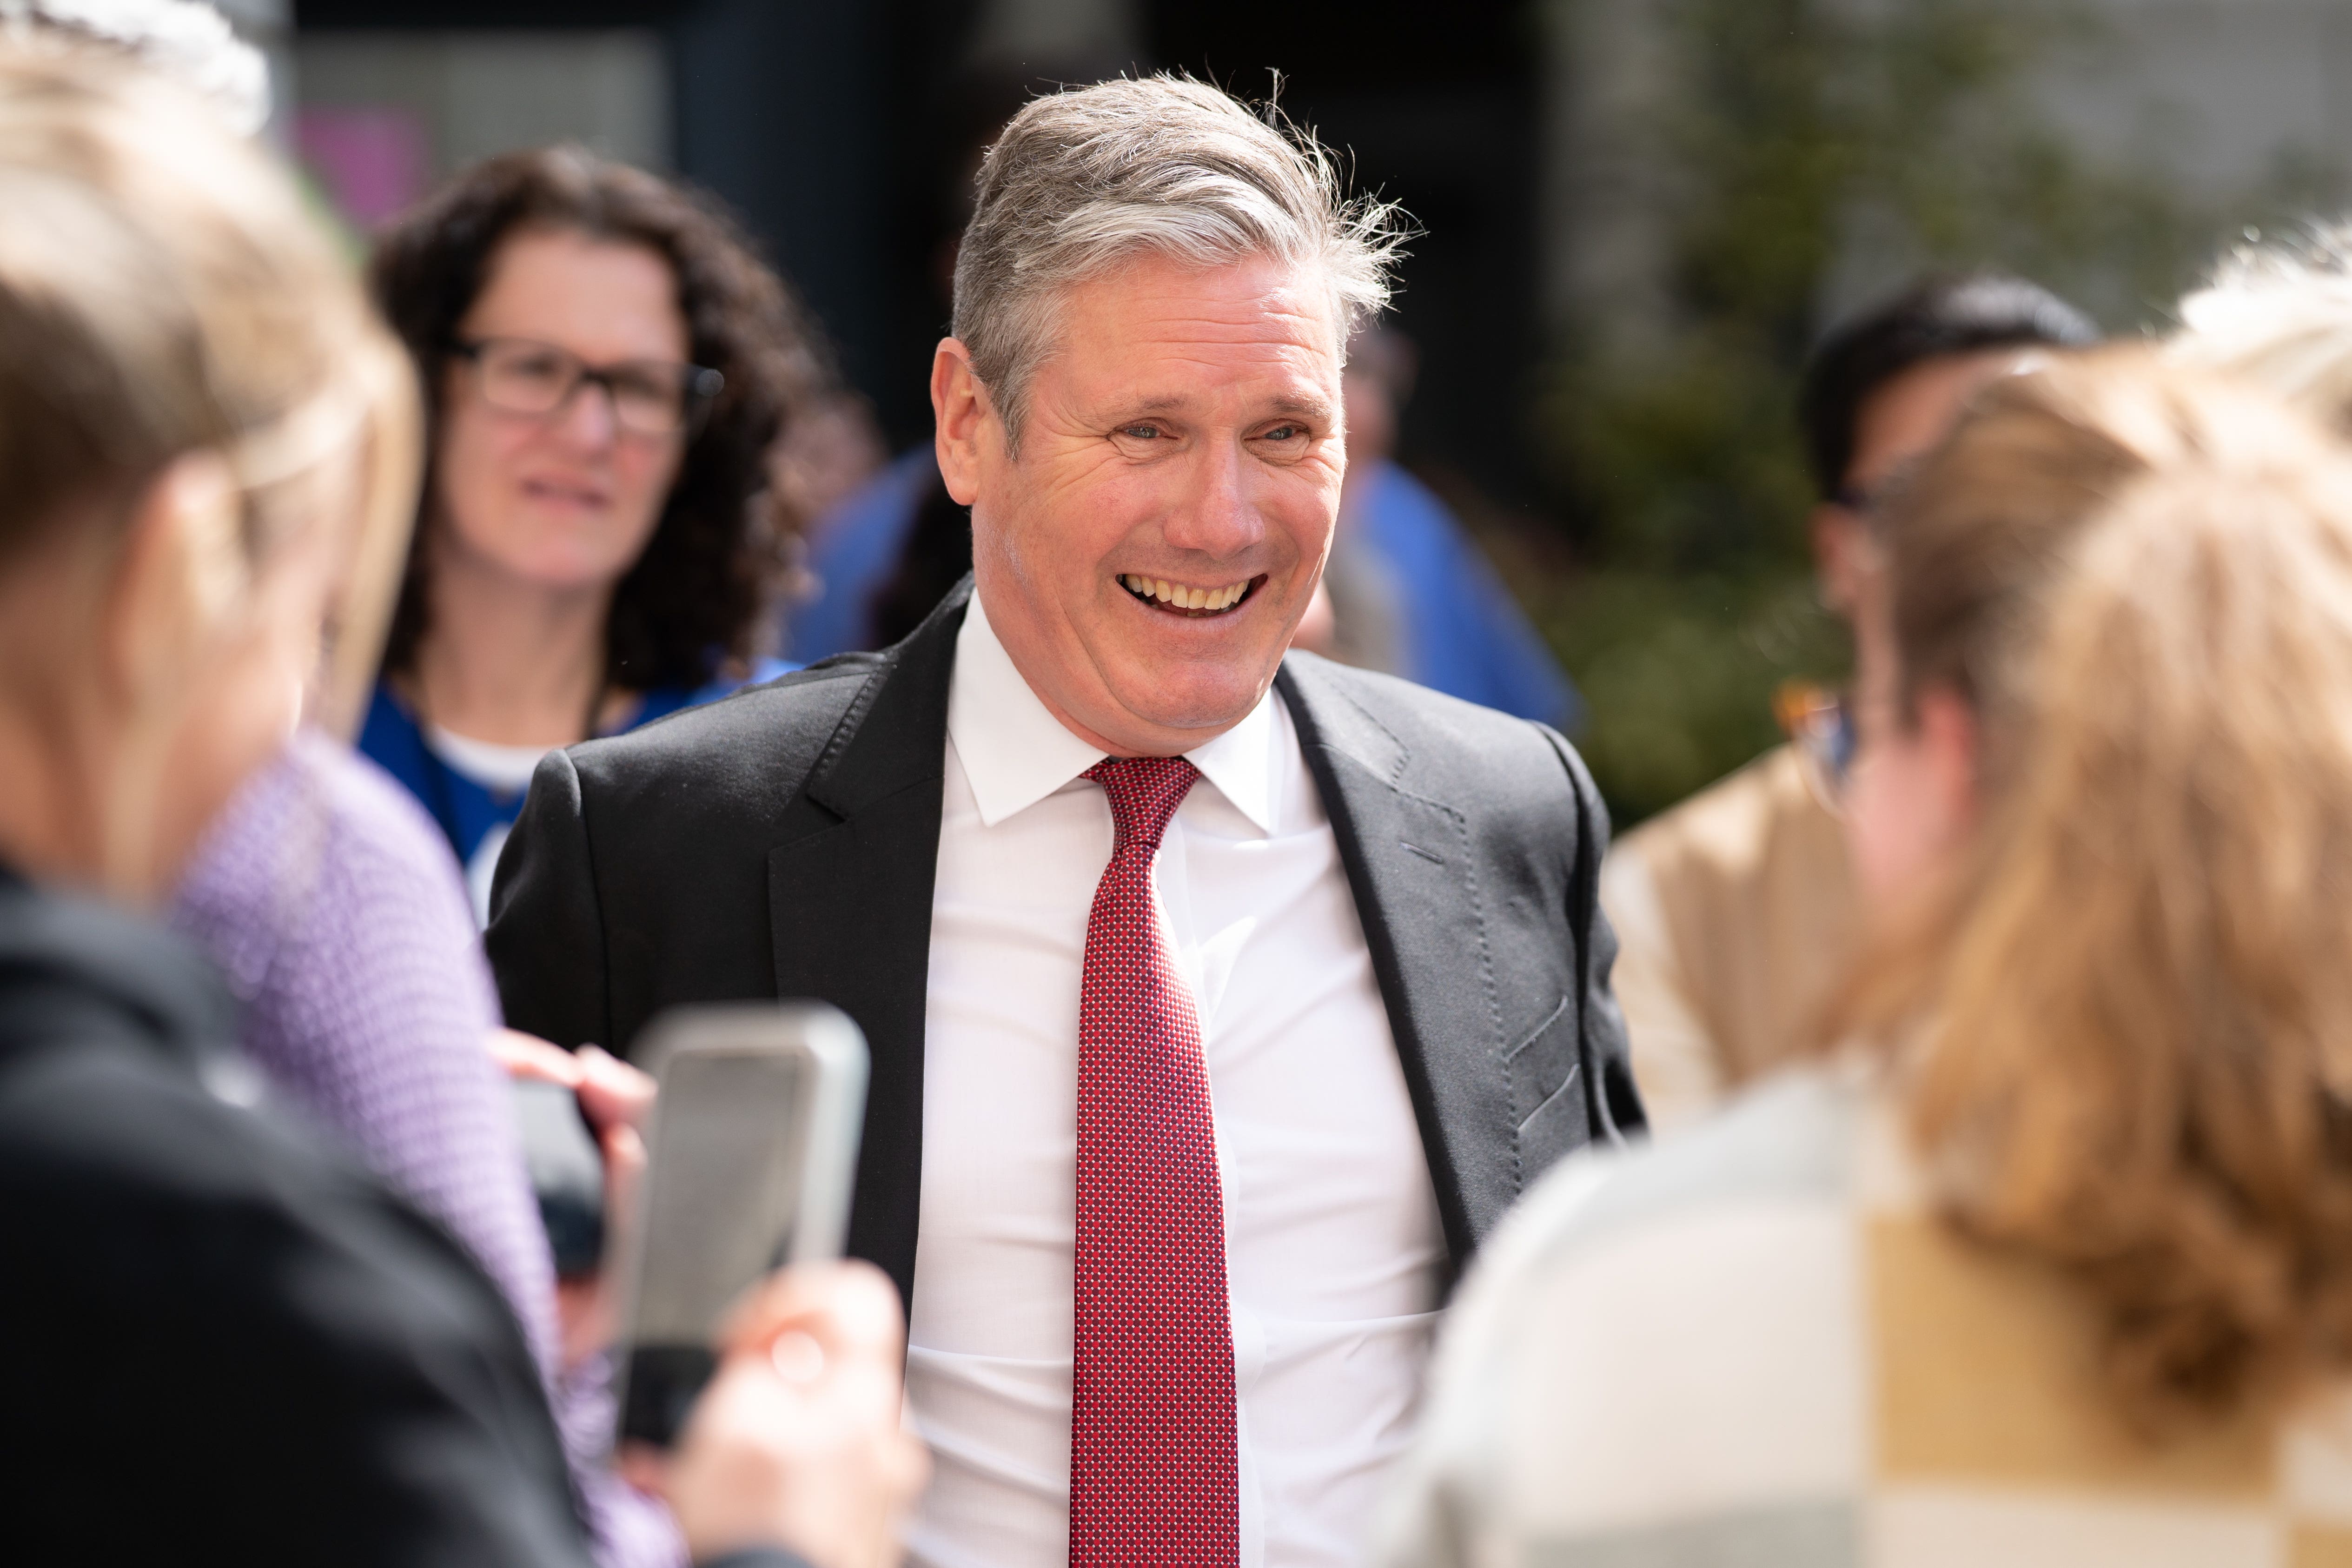 Labour leader Keir Starmer meets staff at Health Sciences Clinical Simulation Unit in North Yorkshire where along with shadow health secretary, Wes Streeting, he met training paramedics and talked to staff about Labour�s health plans. Picture date: Tuesday April 18, 2023.